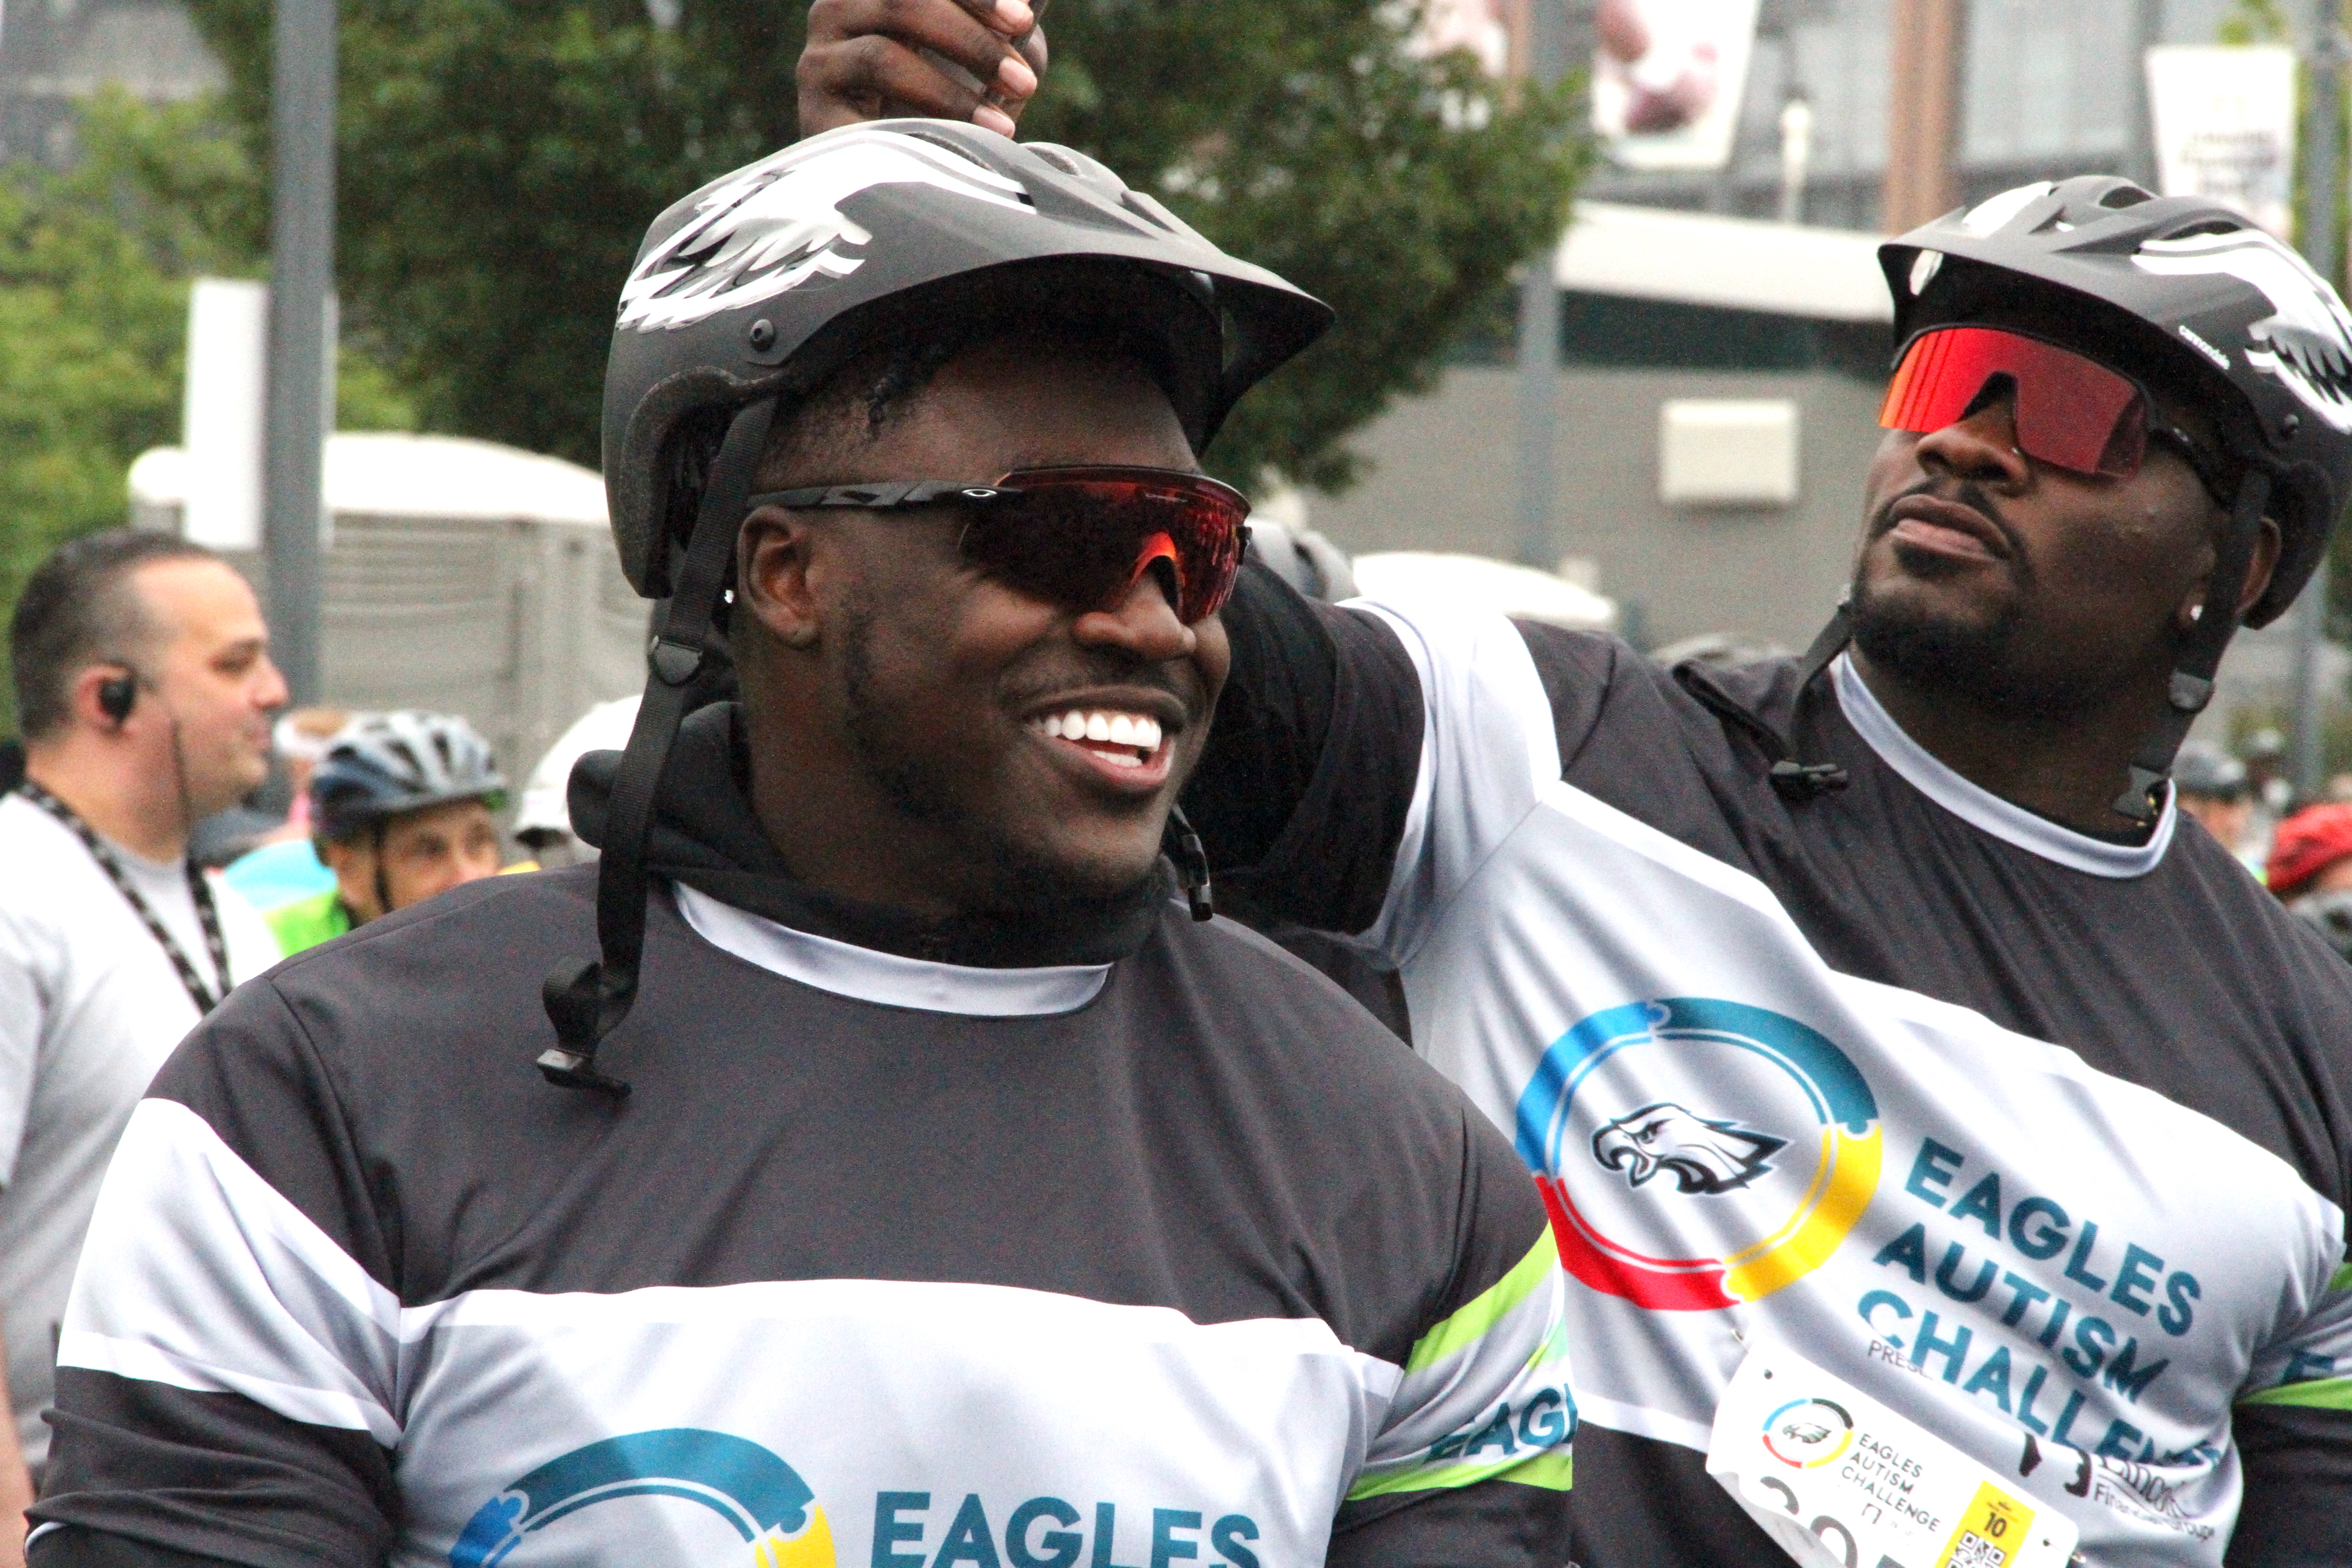 What was Eagles' A.J. Brown's reaction after being nearly hit by a car  during a fundraiser? 